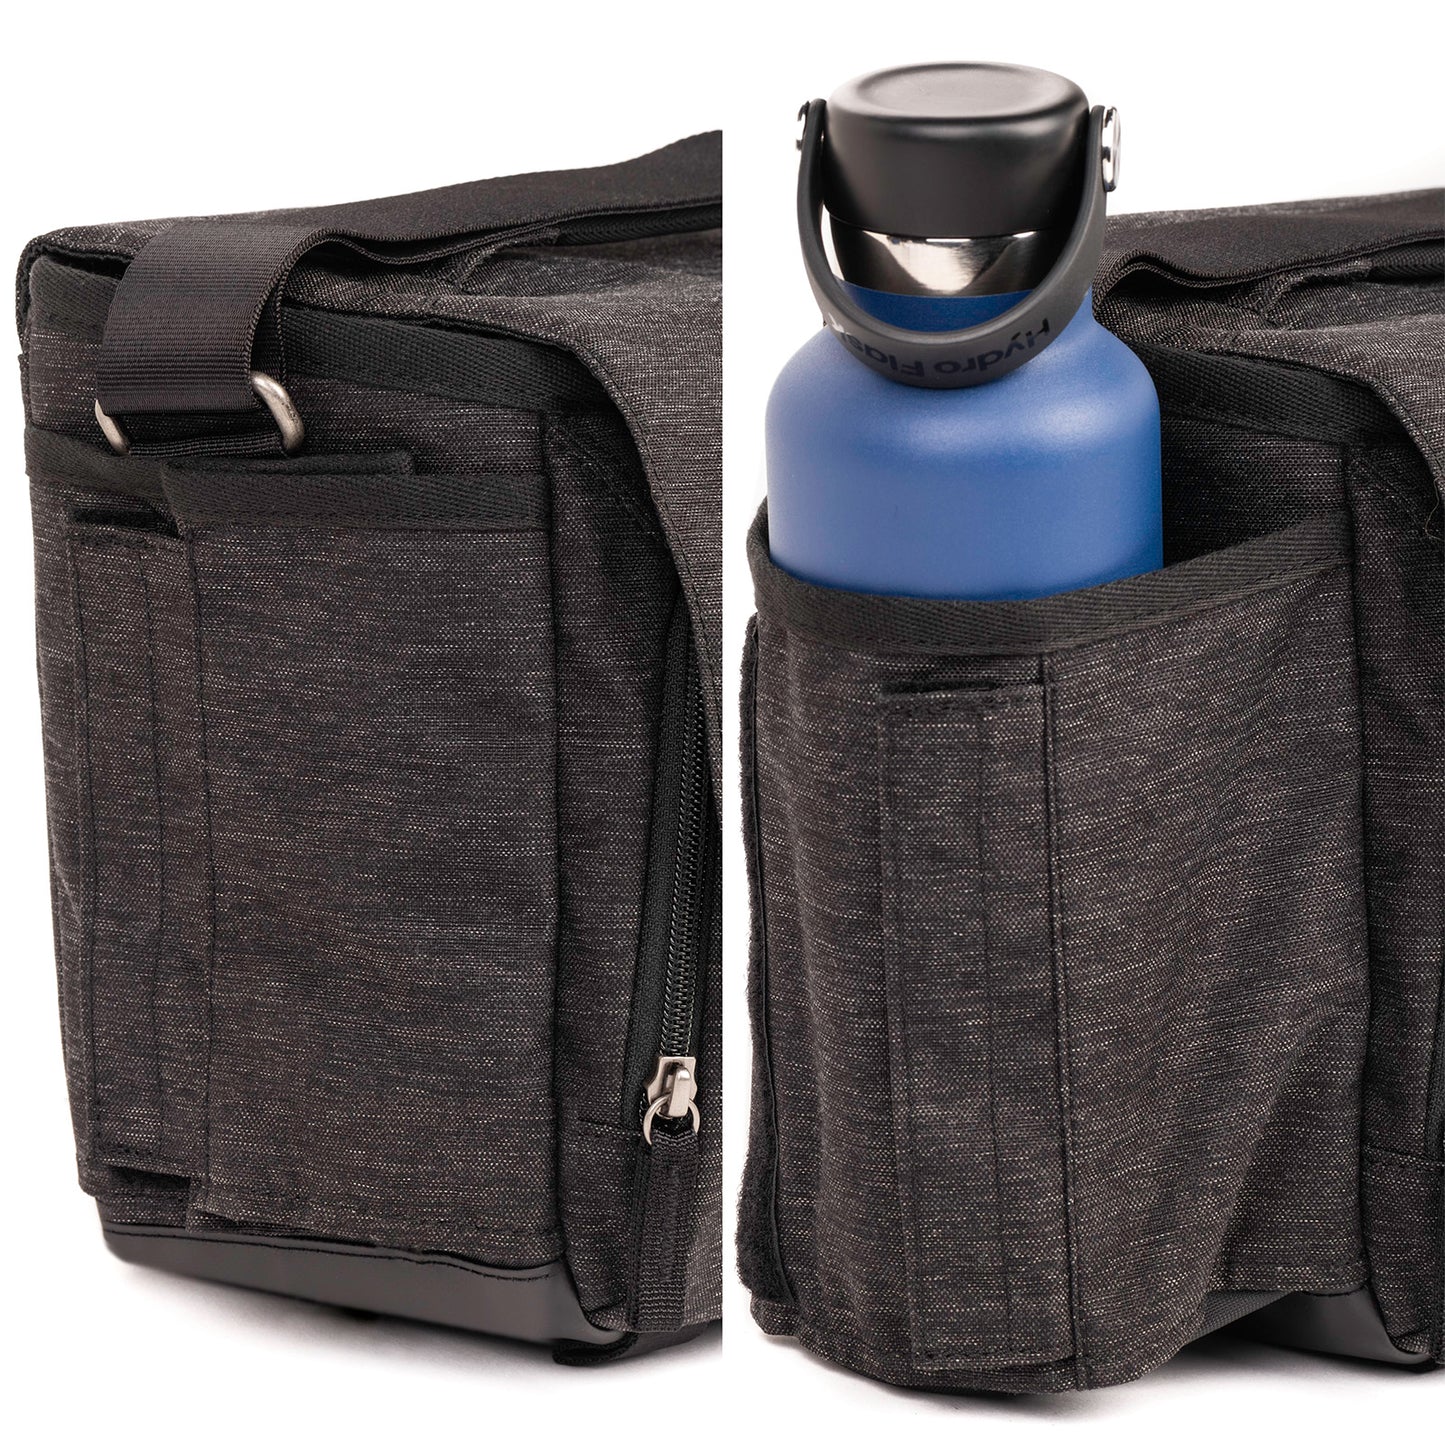 
                  
                    Expandable water bottle pocket fits small to medium sized bottles
                  
                